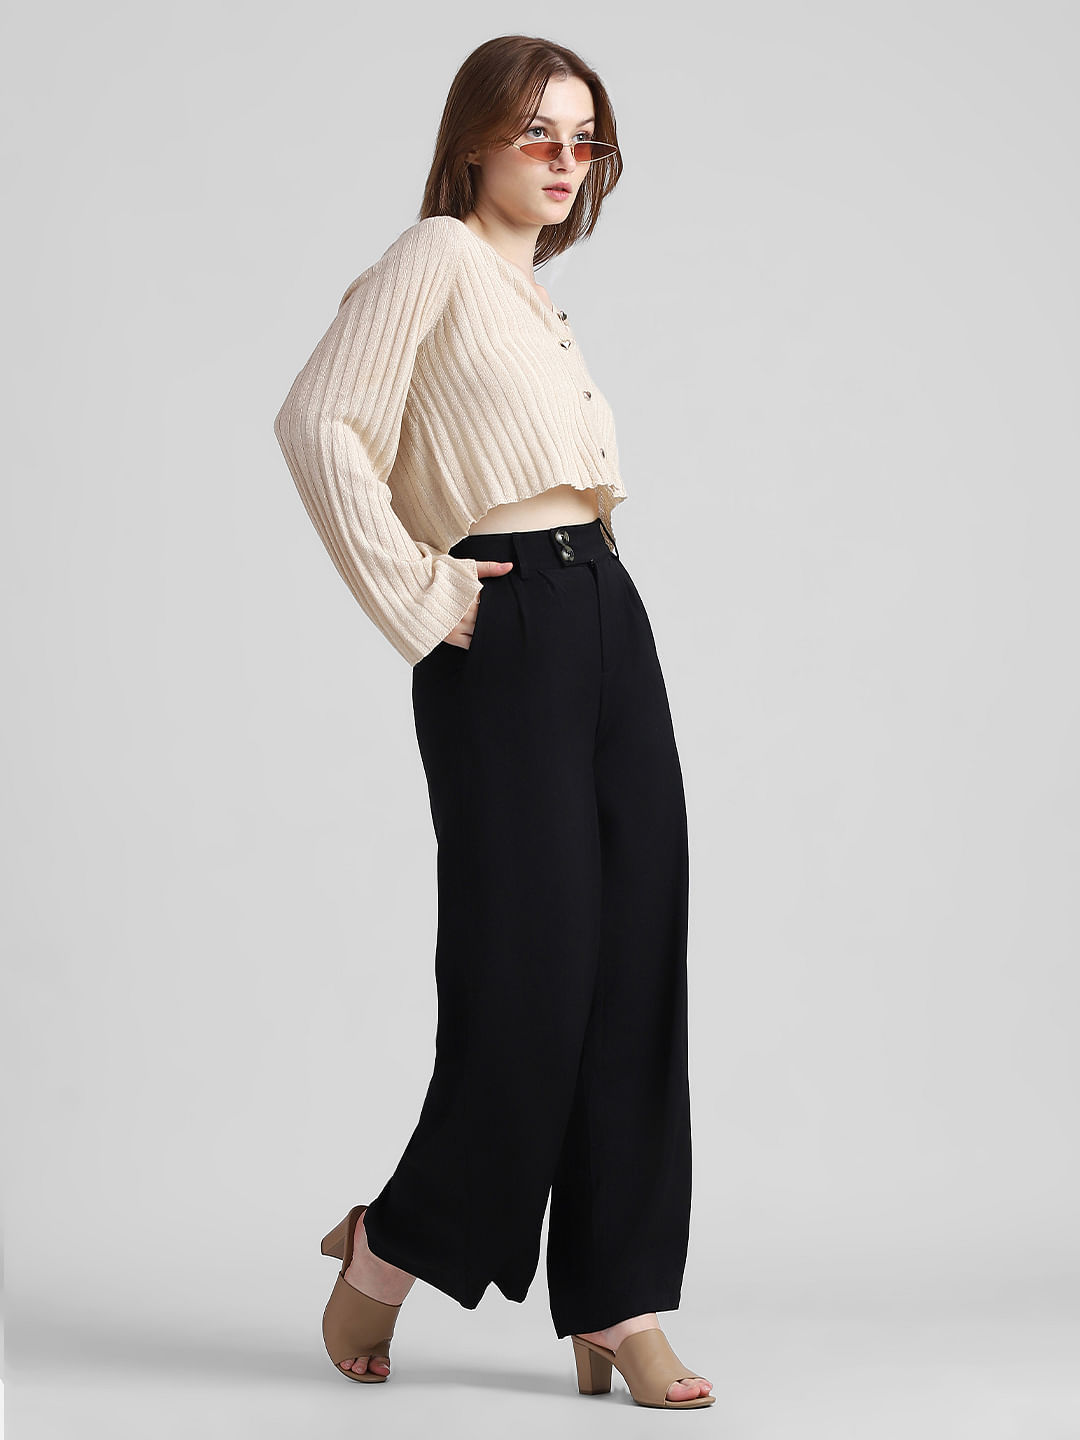 How to Wear Wide Leg Pants 2021 - Uncomplicated Spaces